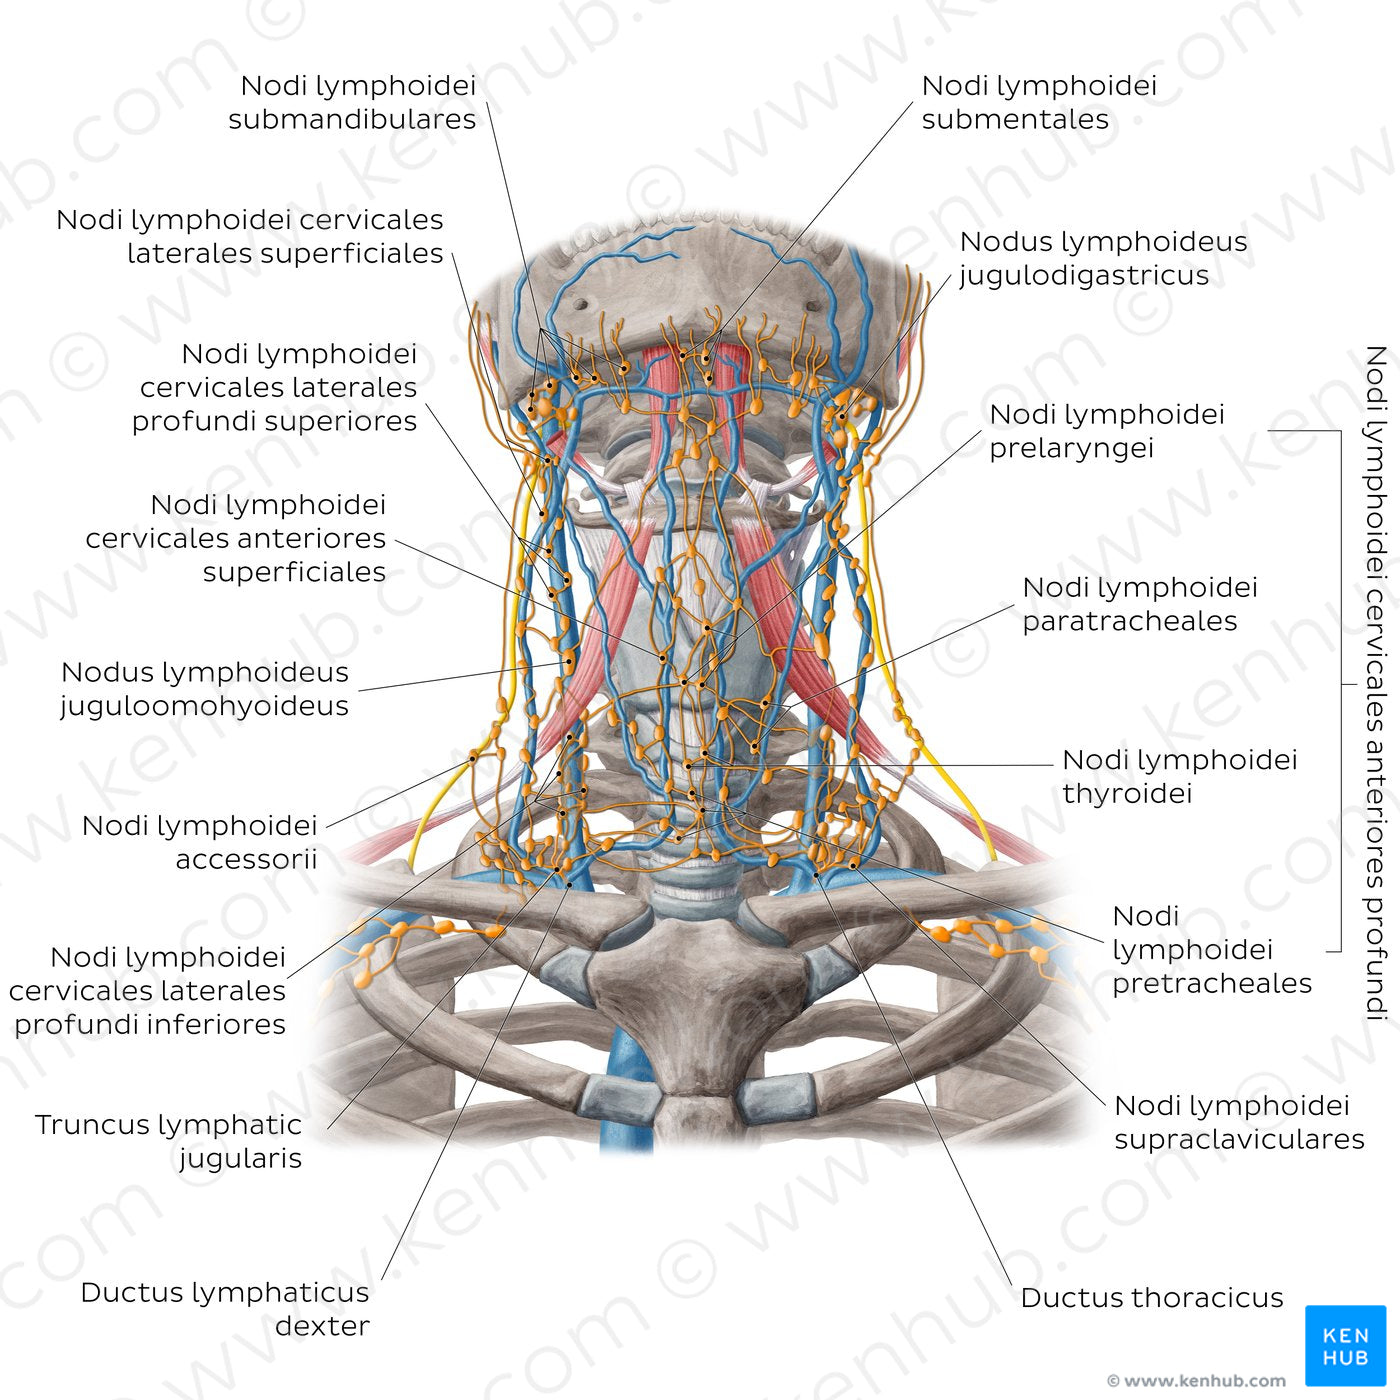 Lymphatics of the head and neck (Anterior) (Latin)